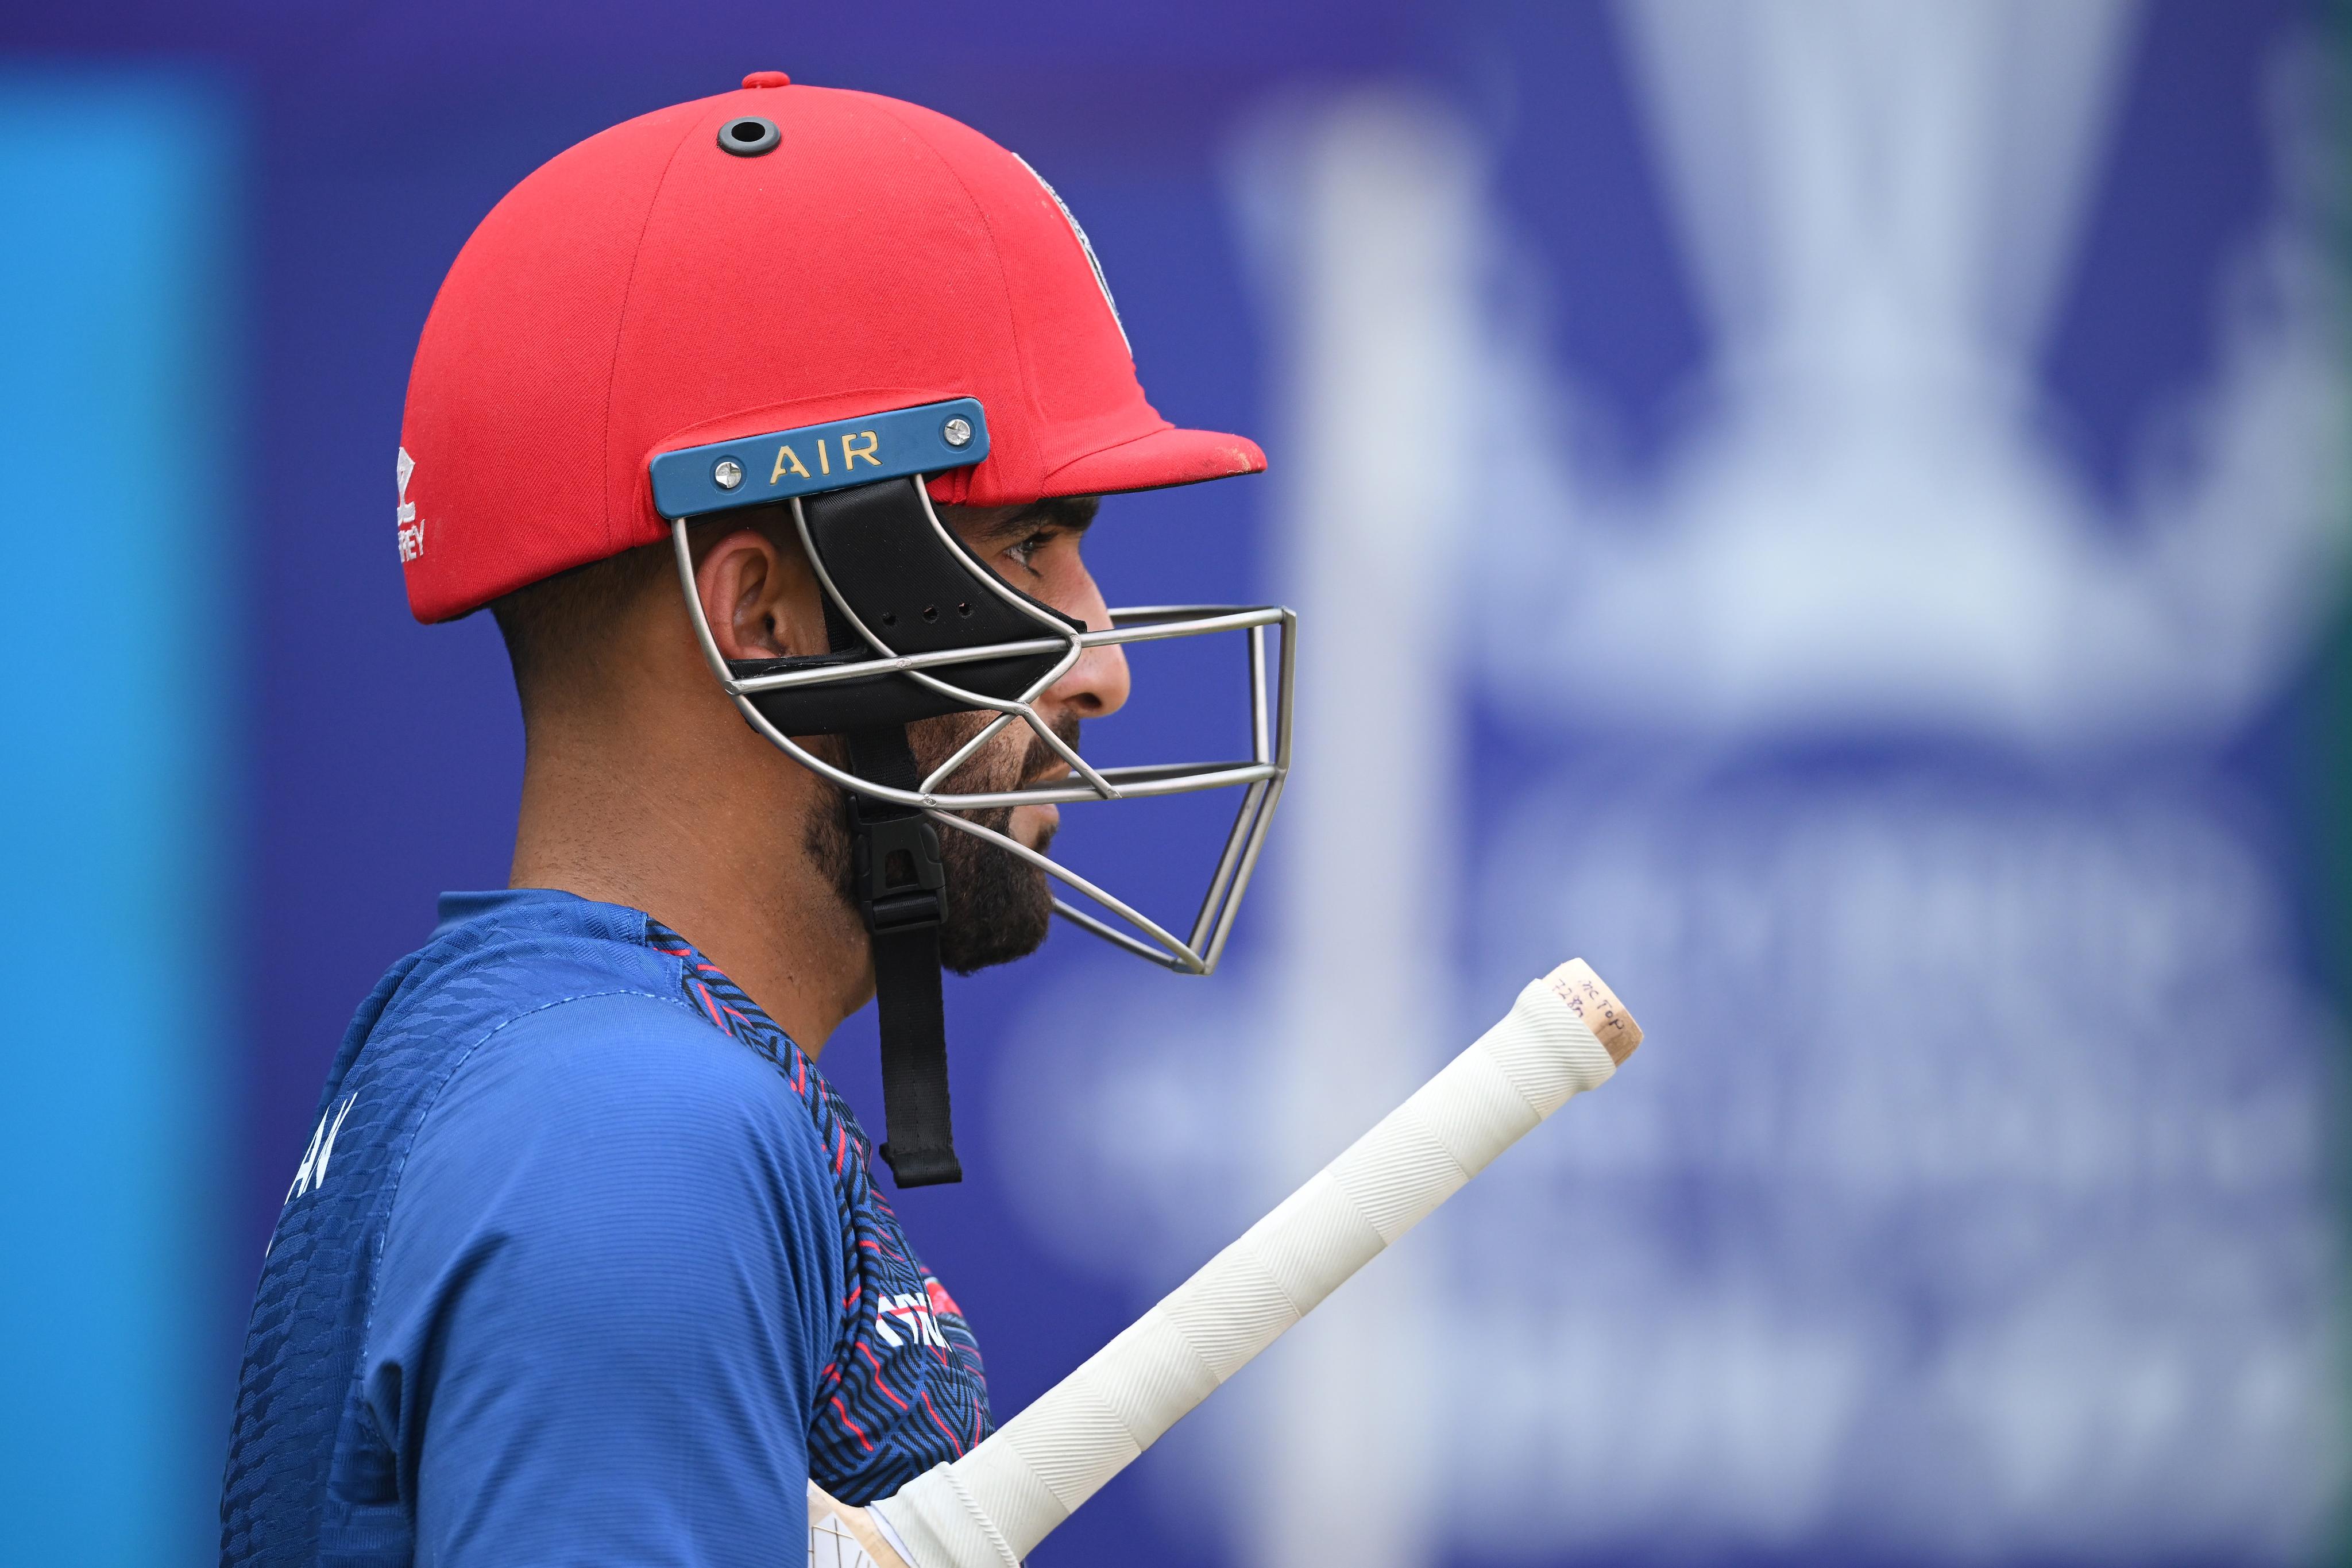 IND vs AFG | Twitter reacts as Shahidi’s street-smarts bail Afghanistan out of trouble with two free hits